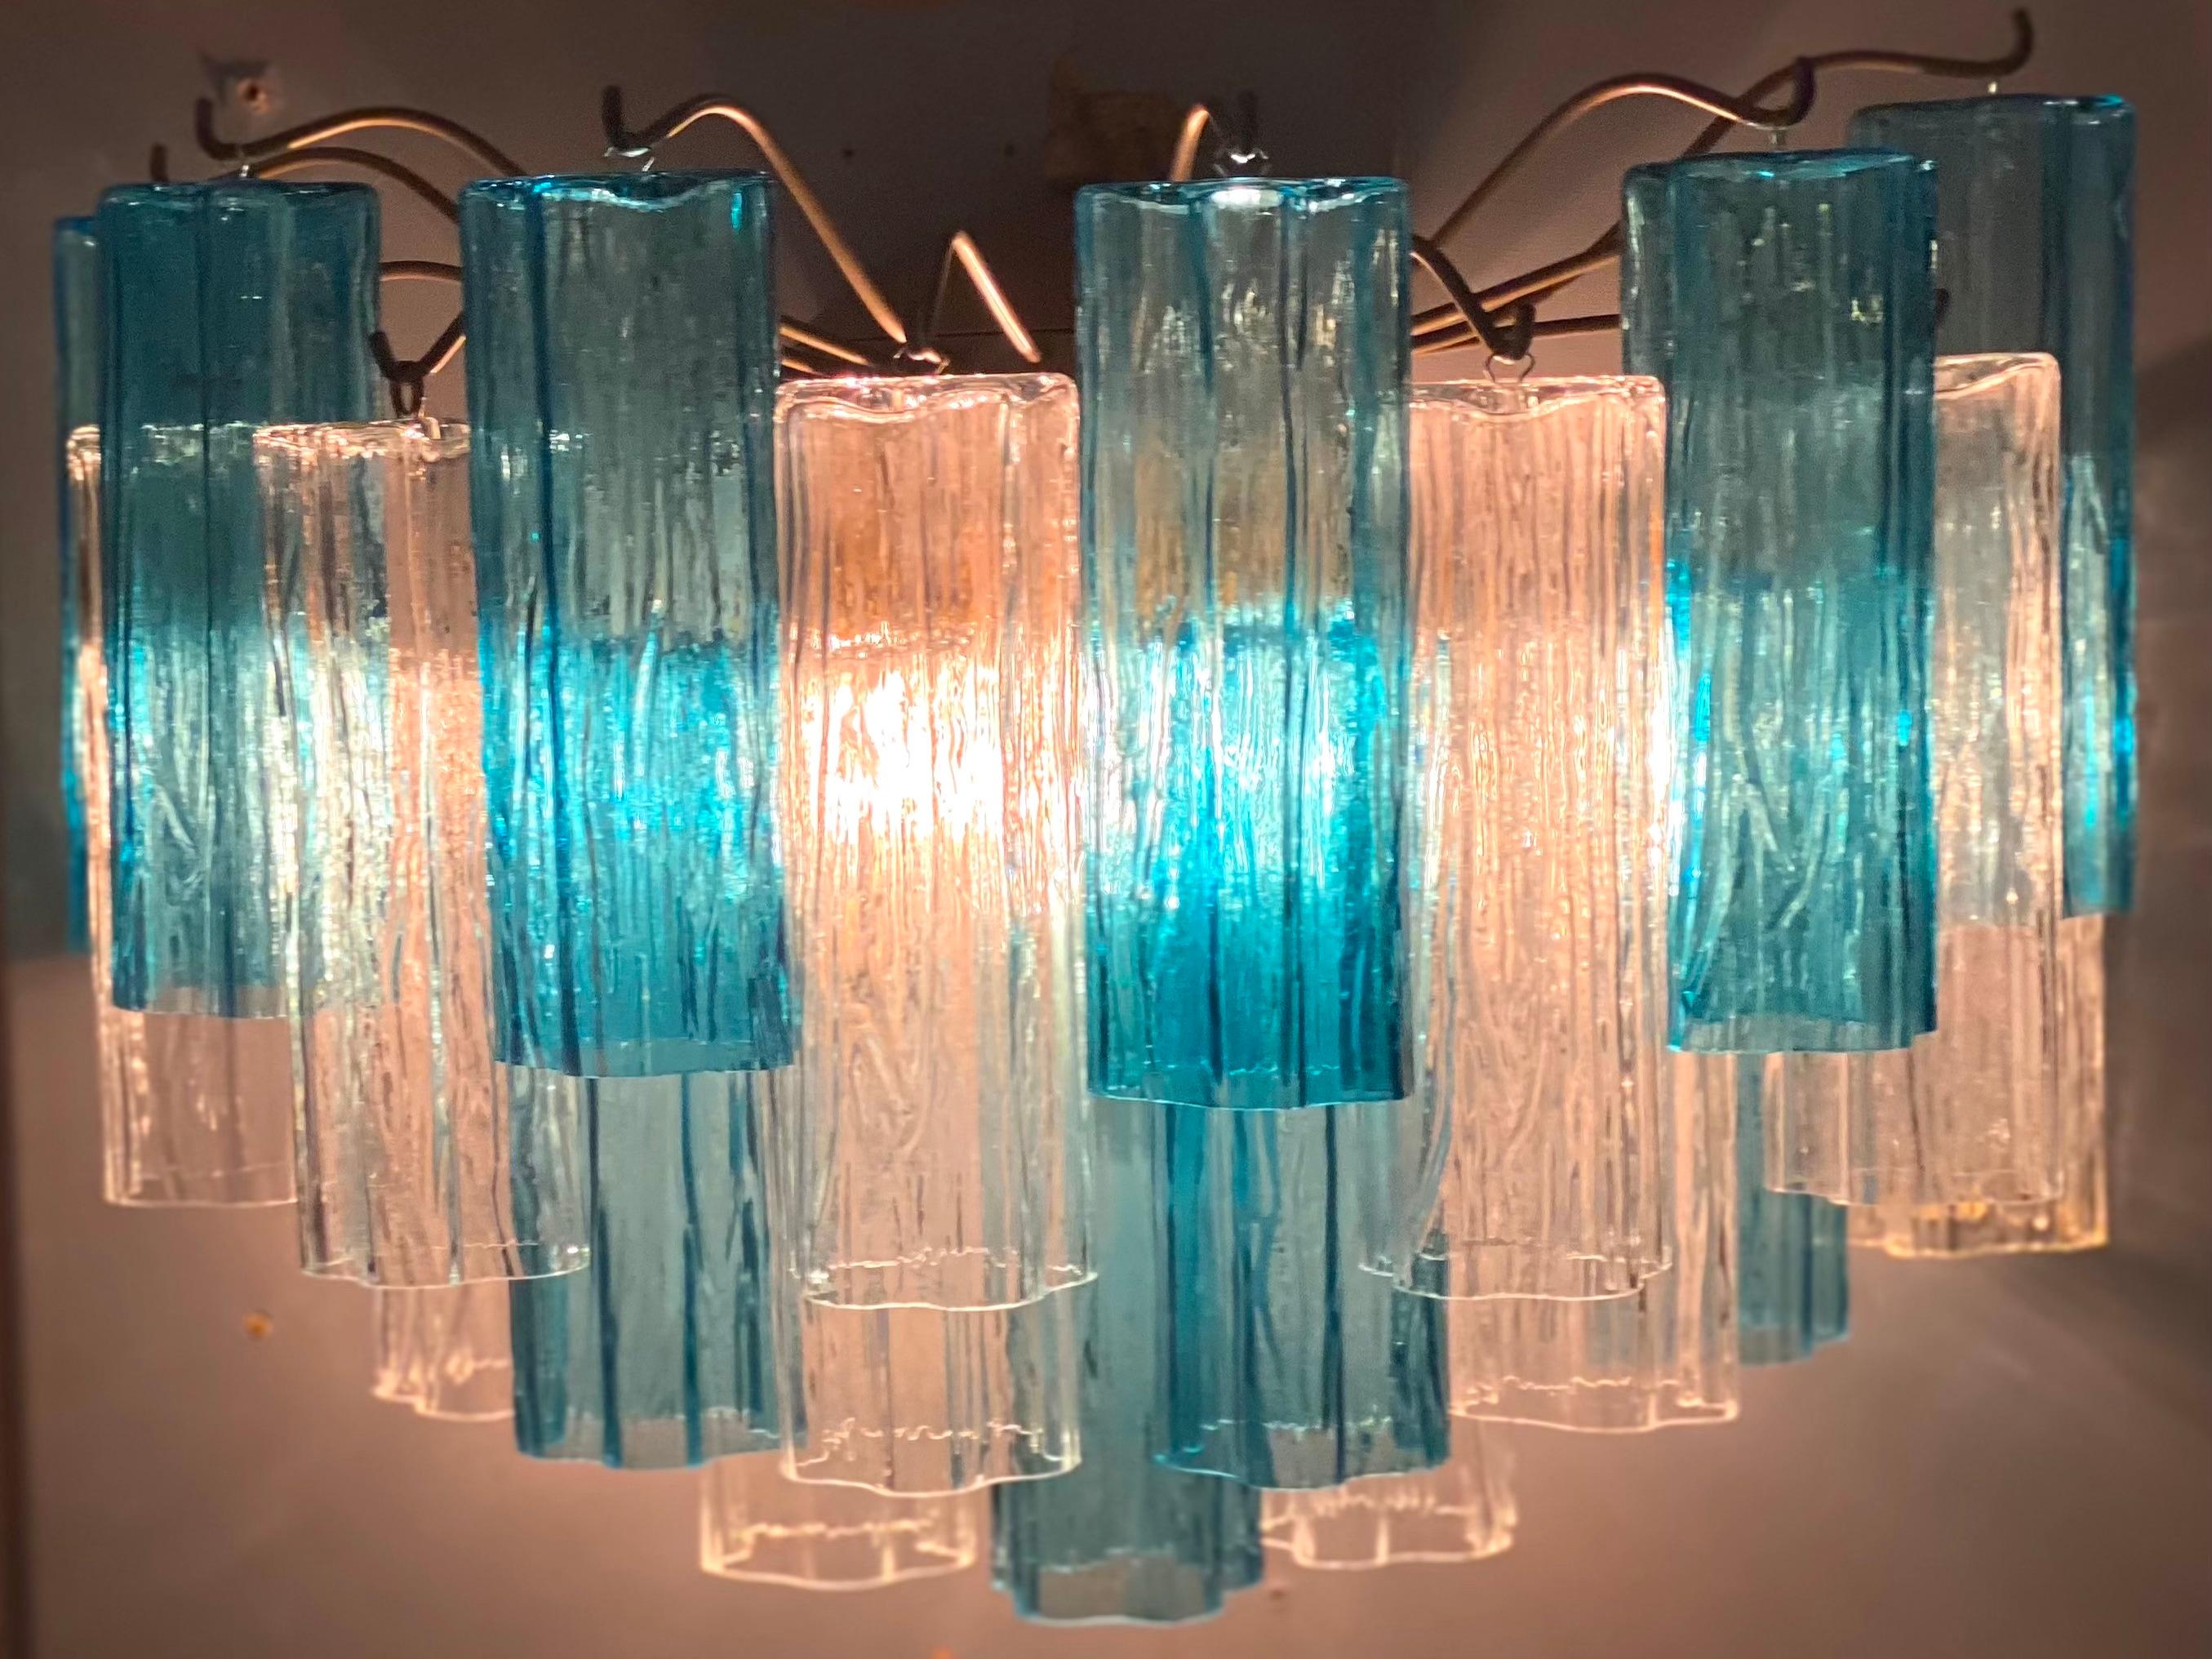 21 hand blown blue and clear Murano glass Tronchi, each measuring 7.00” long.
Available 4 pairs and also with a pink, red and amber glasses.
Three E14 light bulbs. We can wire for your country standards.

